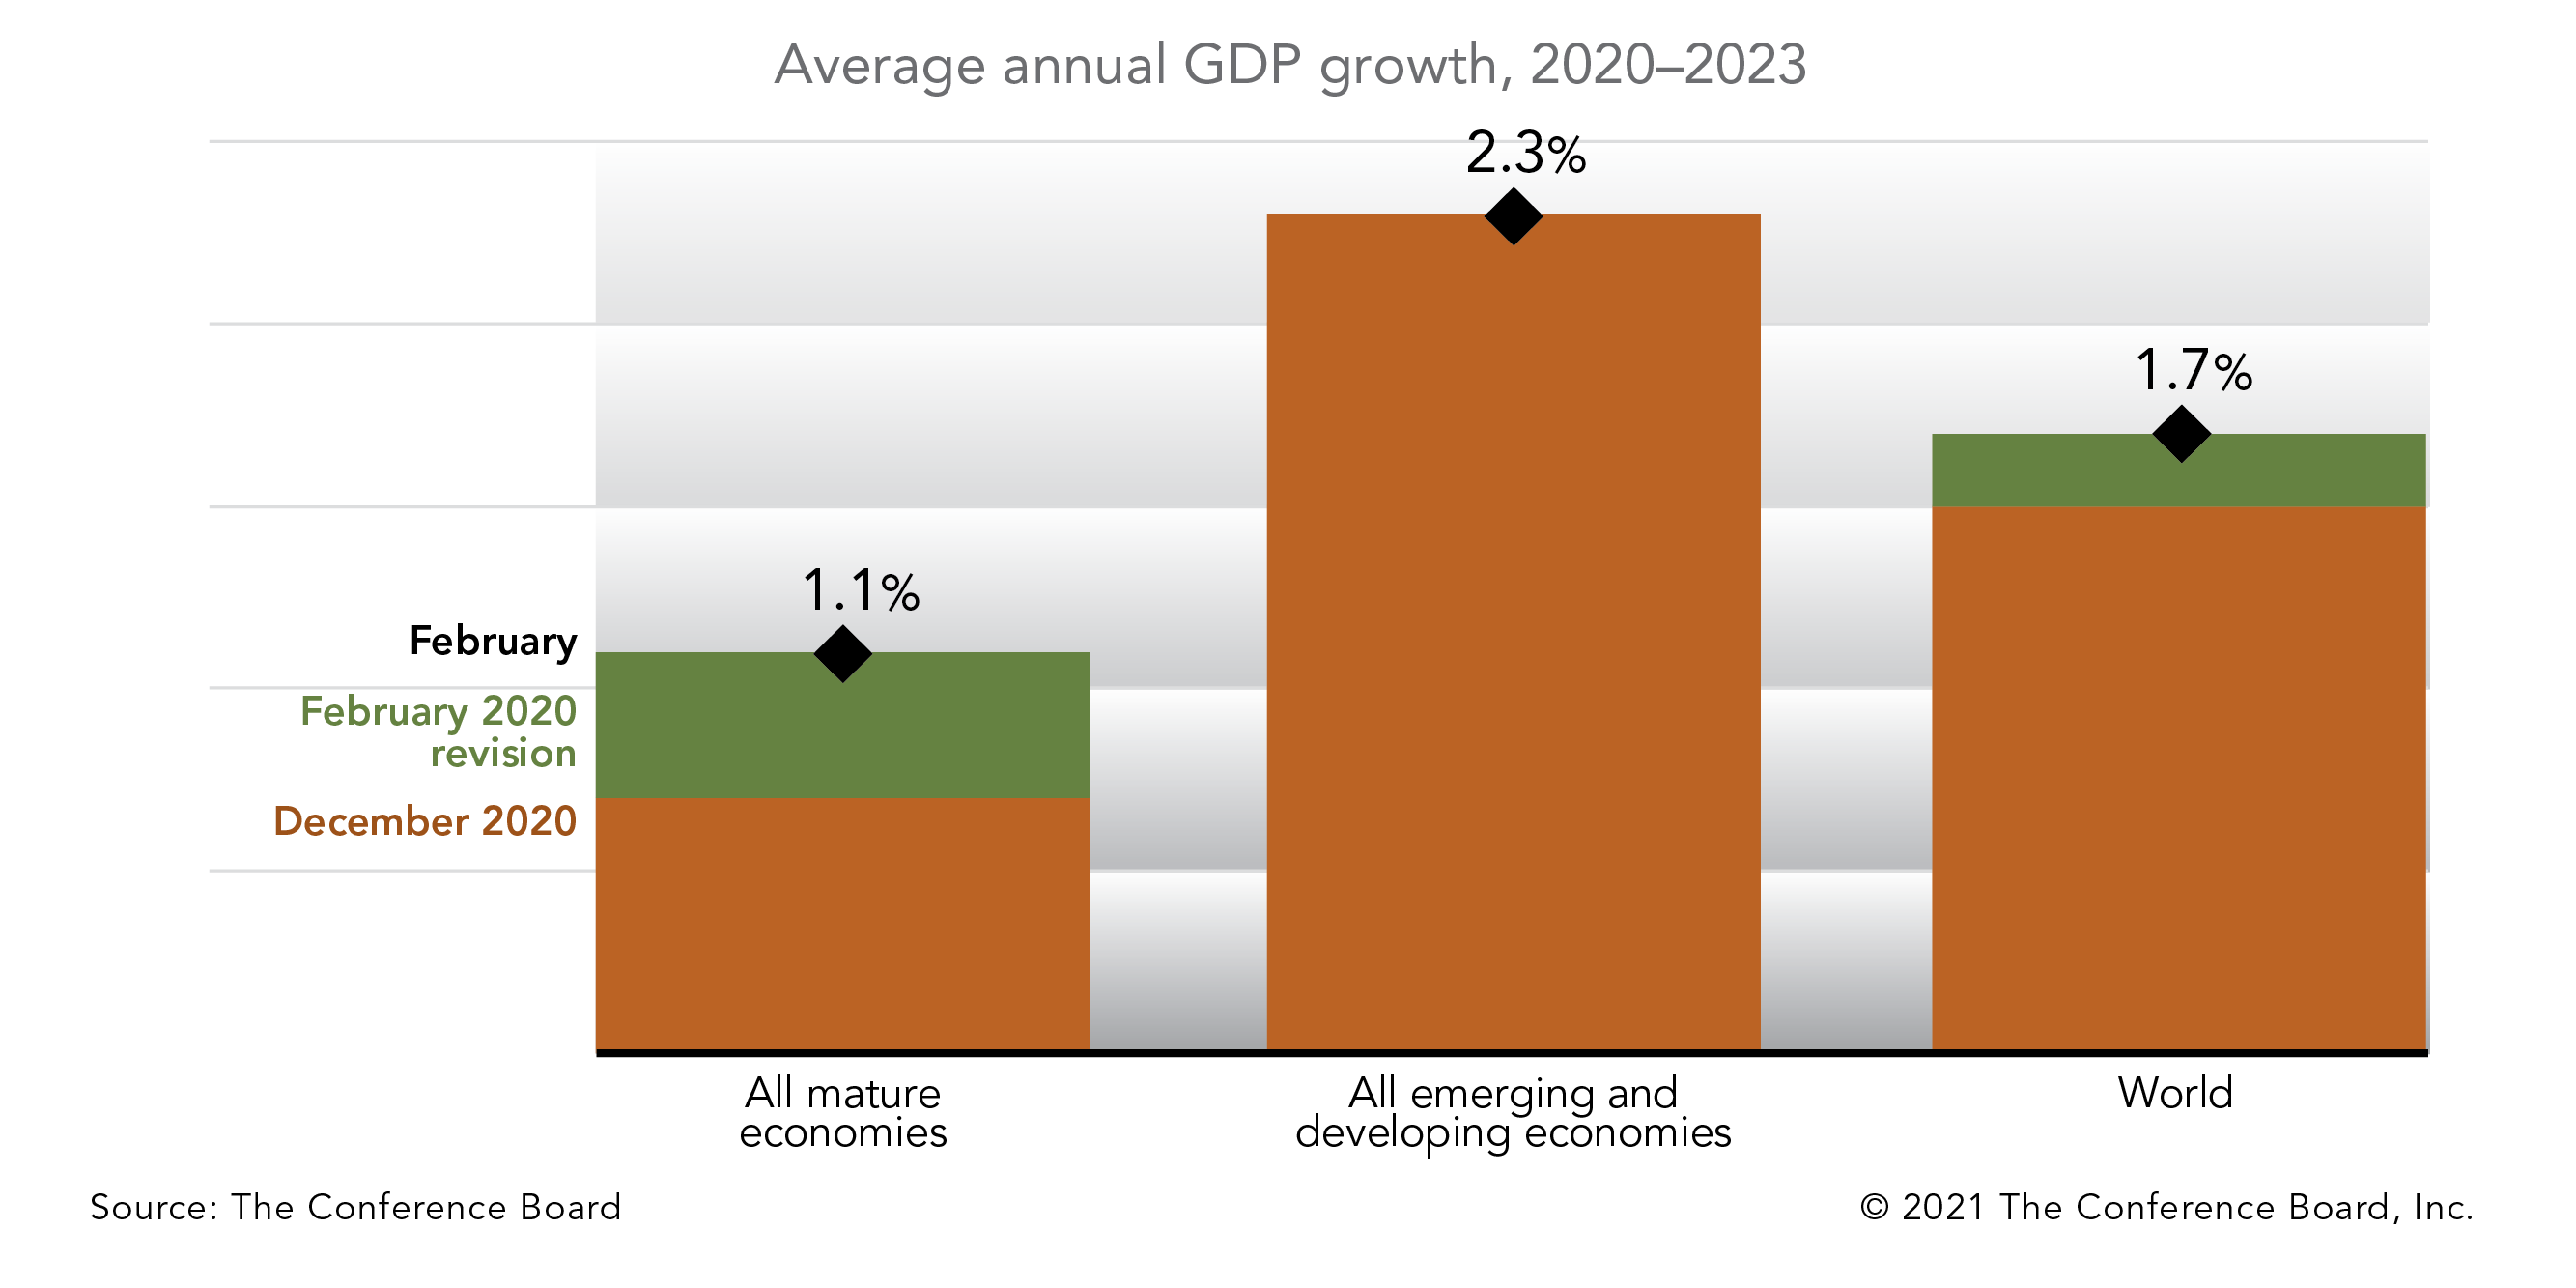 Global economic outlook improves—due to boost in mature economies